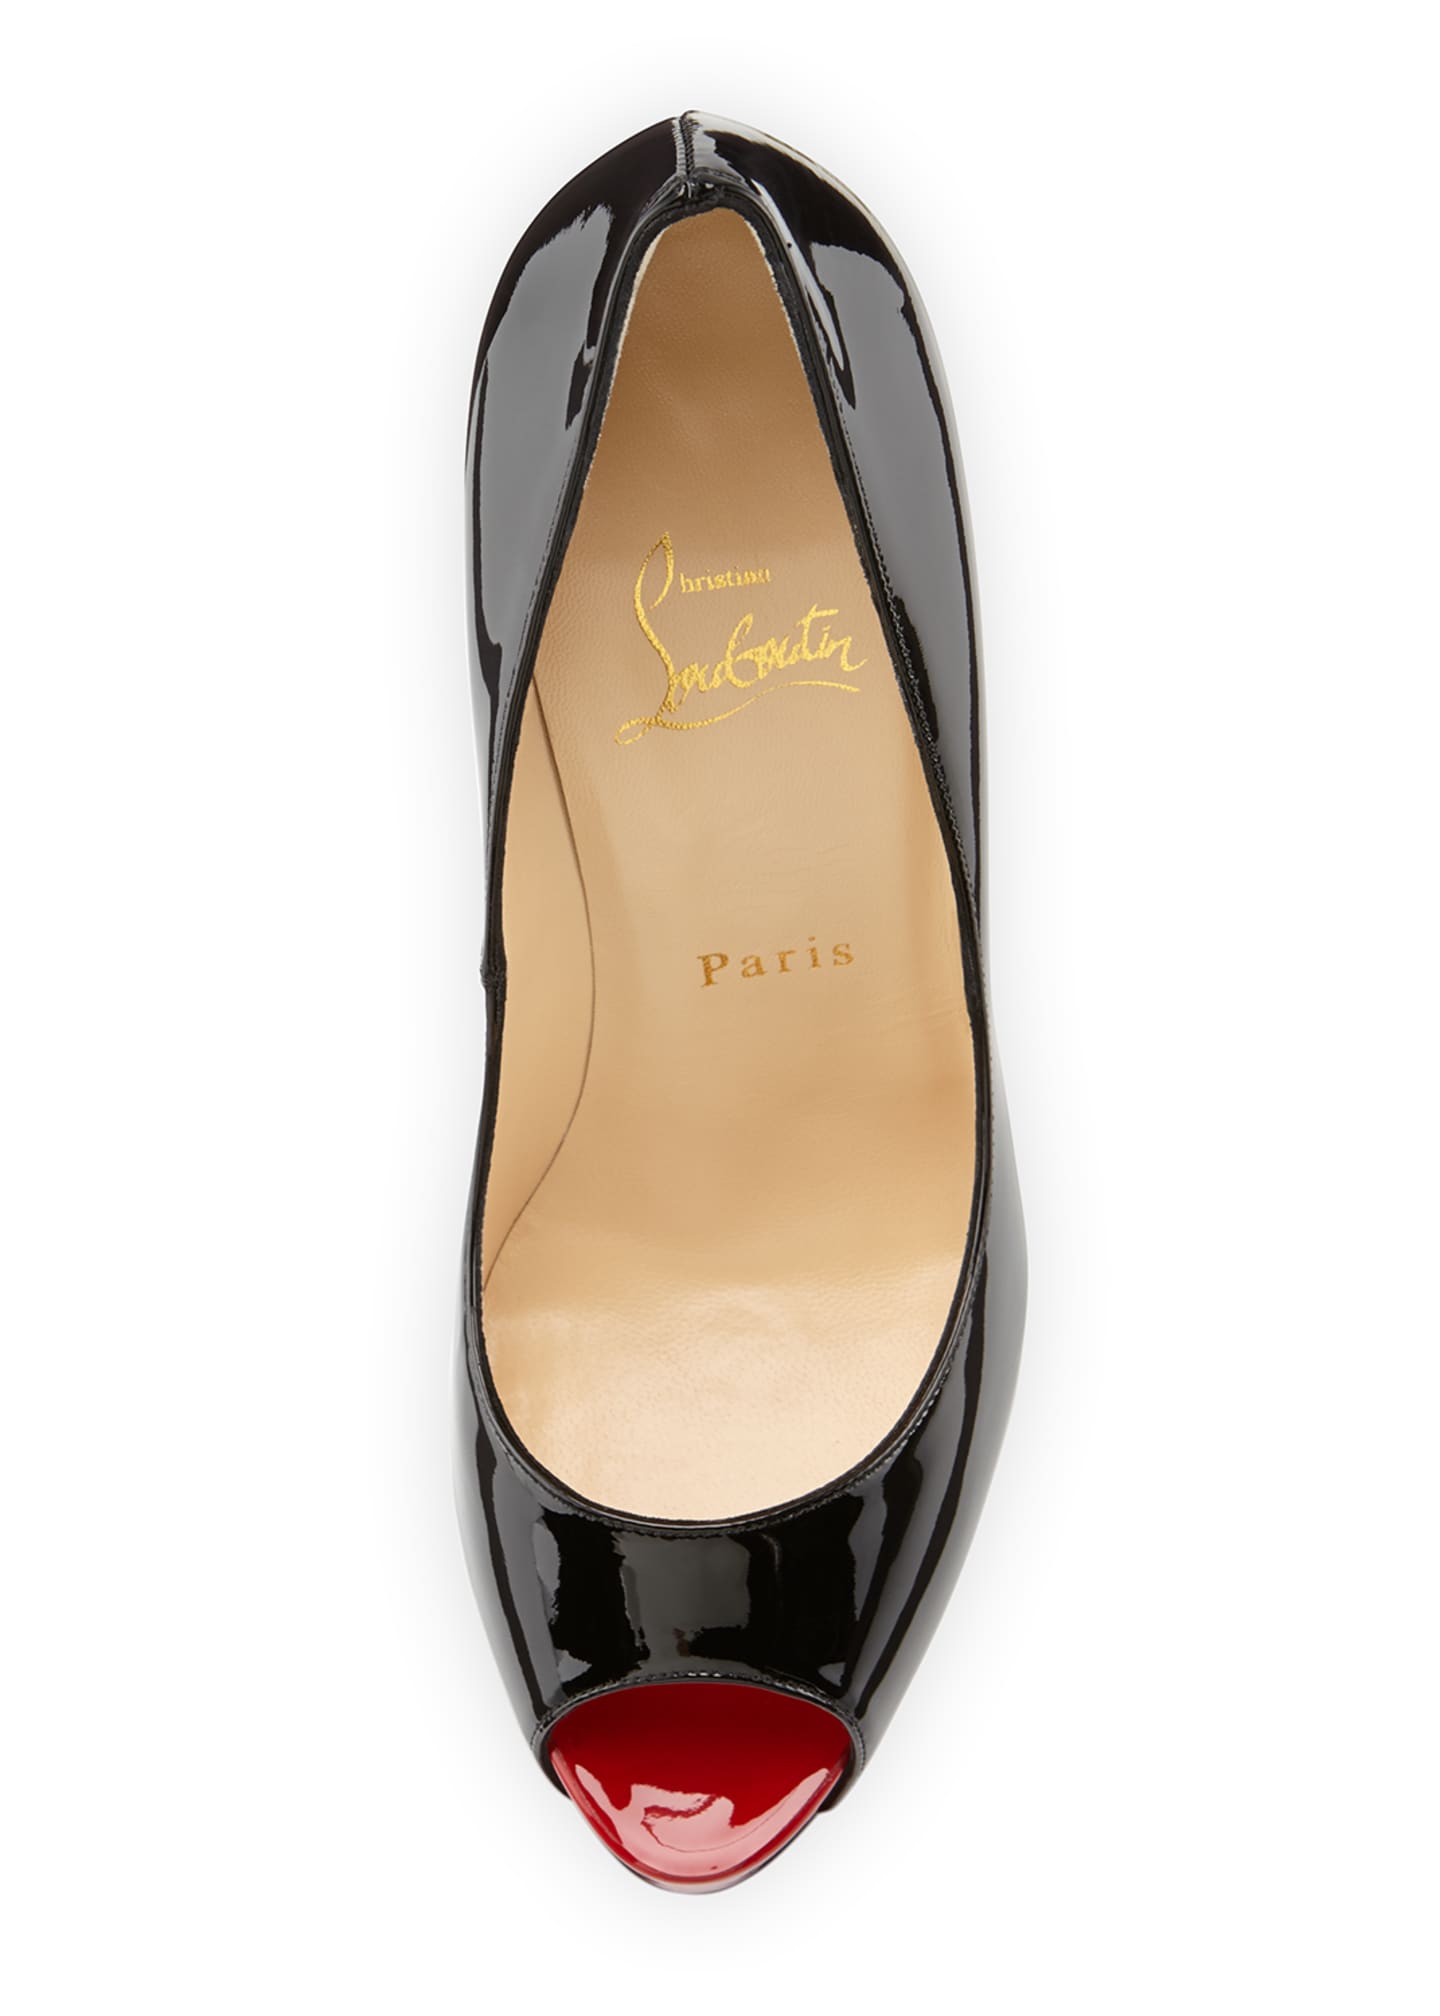 Christian Louboutin New Very Prive Patent Pumps